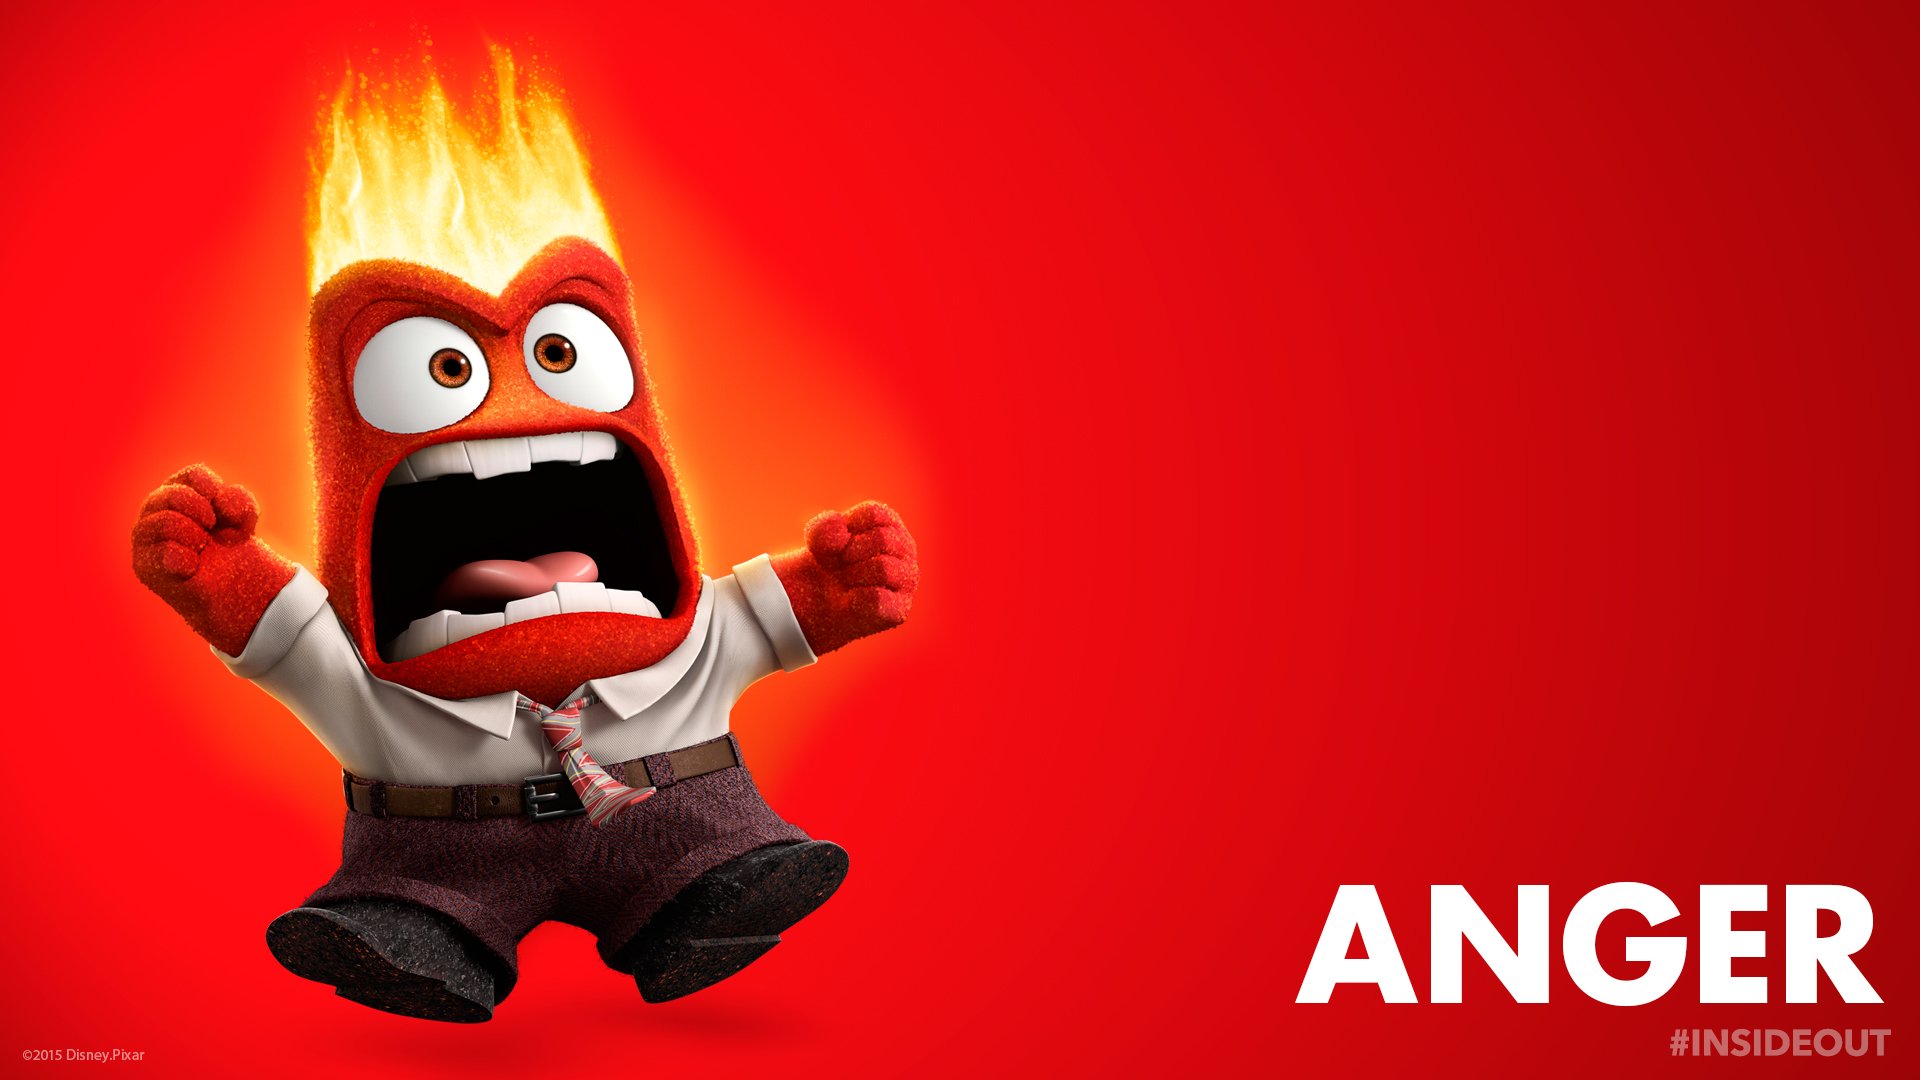 Inside Out Anger Wallpaper   Animated Movies Wallpaper 38596551